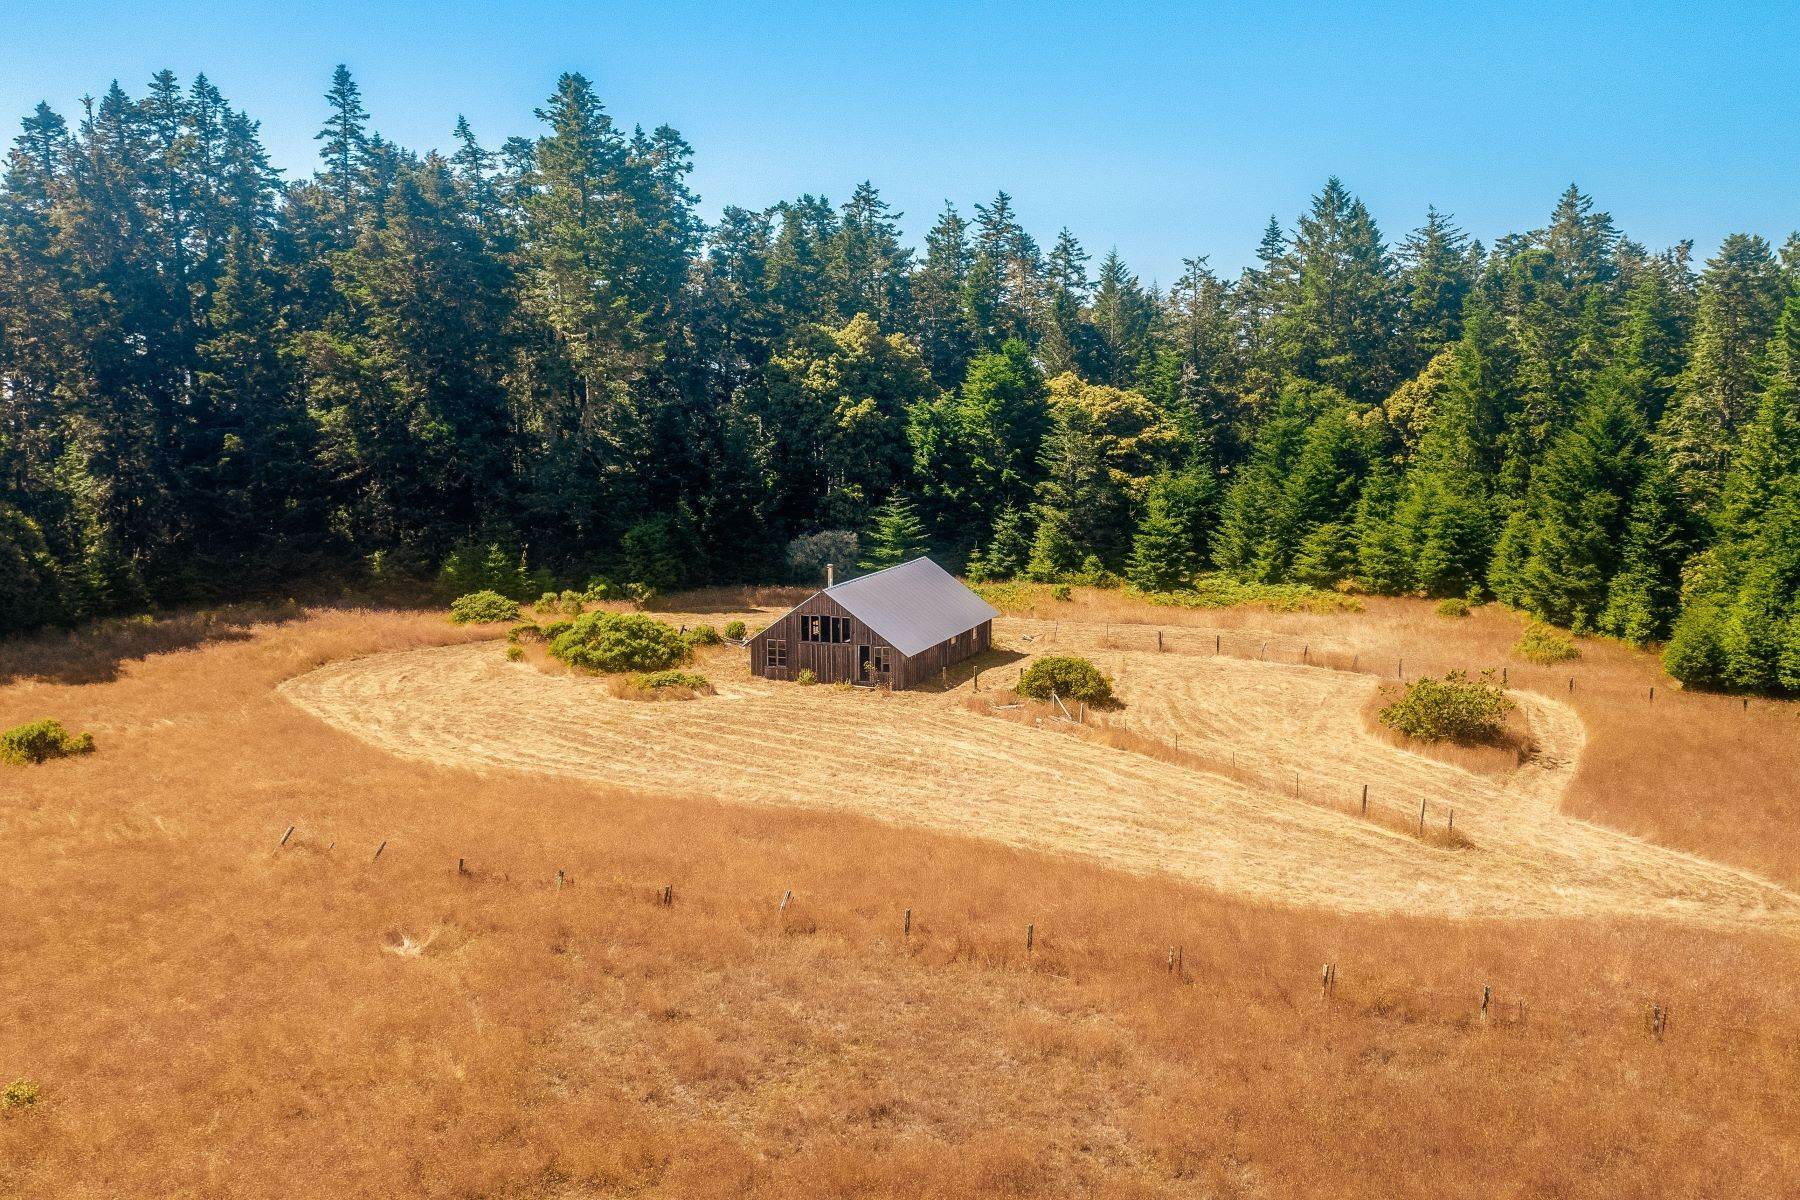 33. Property for Sale at The Kristofferson Ranch 2401 South Highway 1 Elk, California 95432 United States